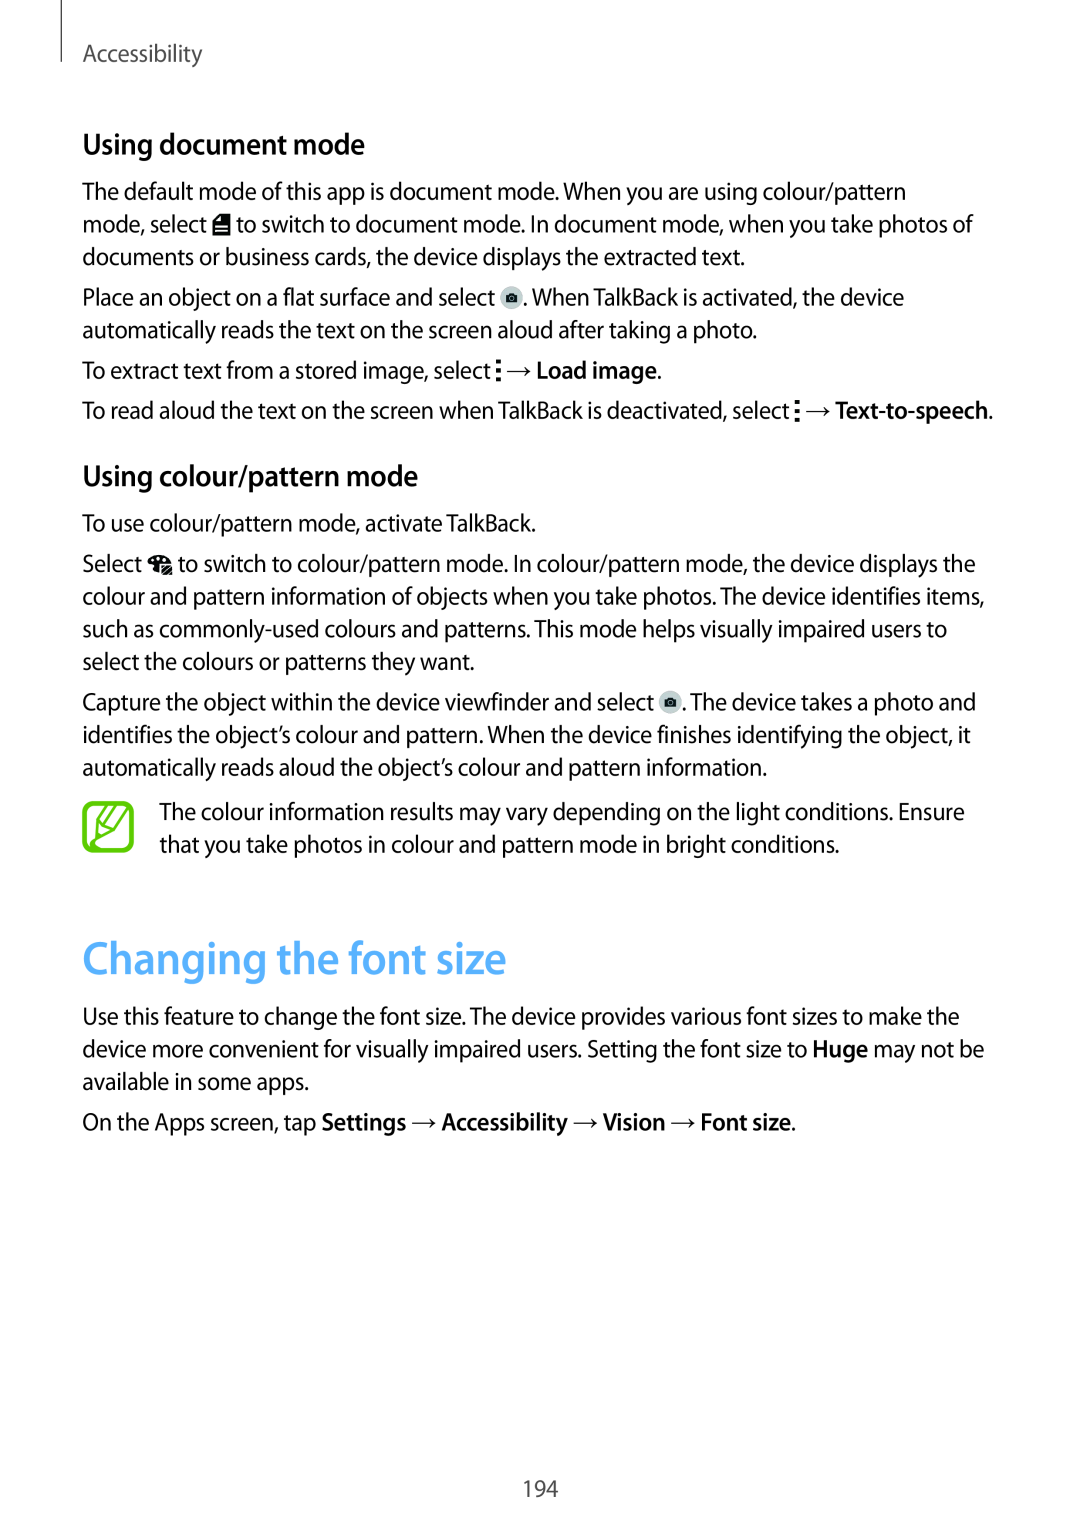 Samsung SM-G901FZKAEUR manual Changing the font size, Using document mode, Using colour/pattern mode, Accessibility 